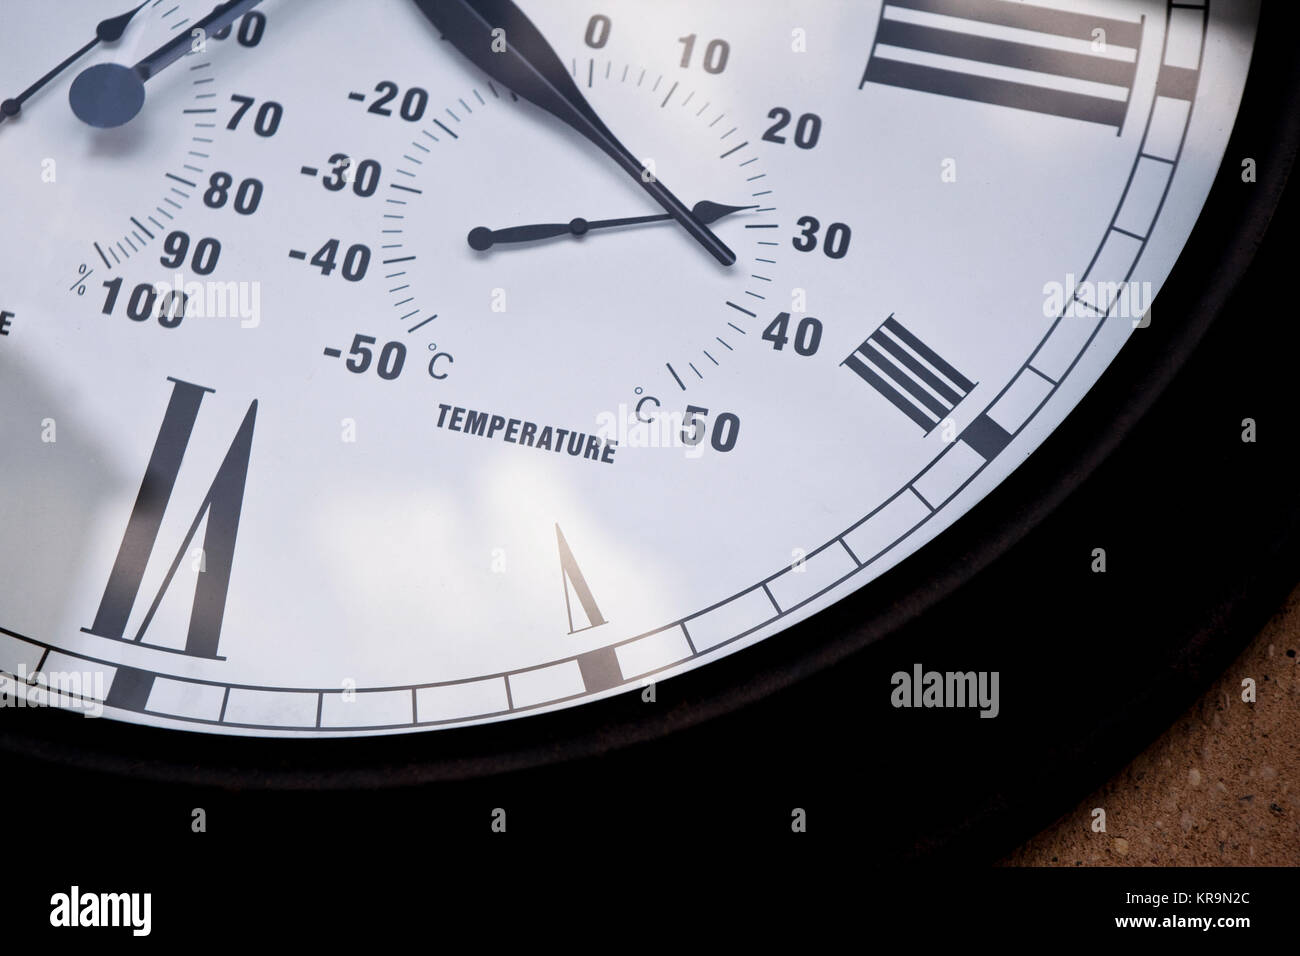 numbers-on-a-clock-stock-photo-alamy